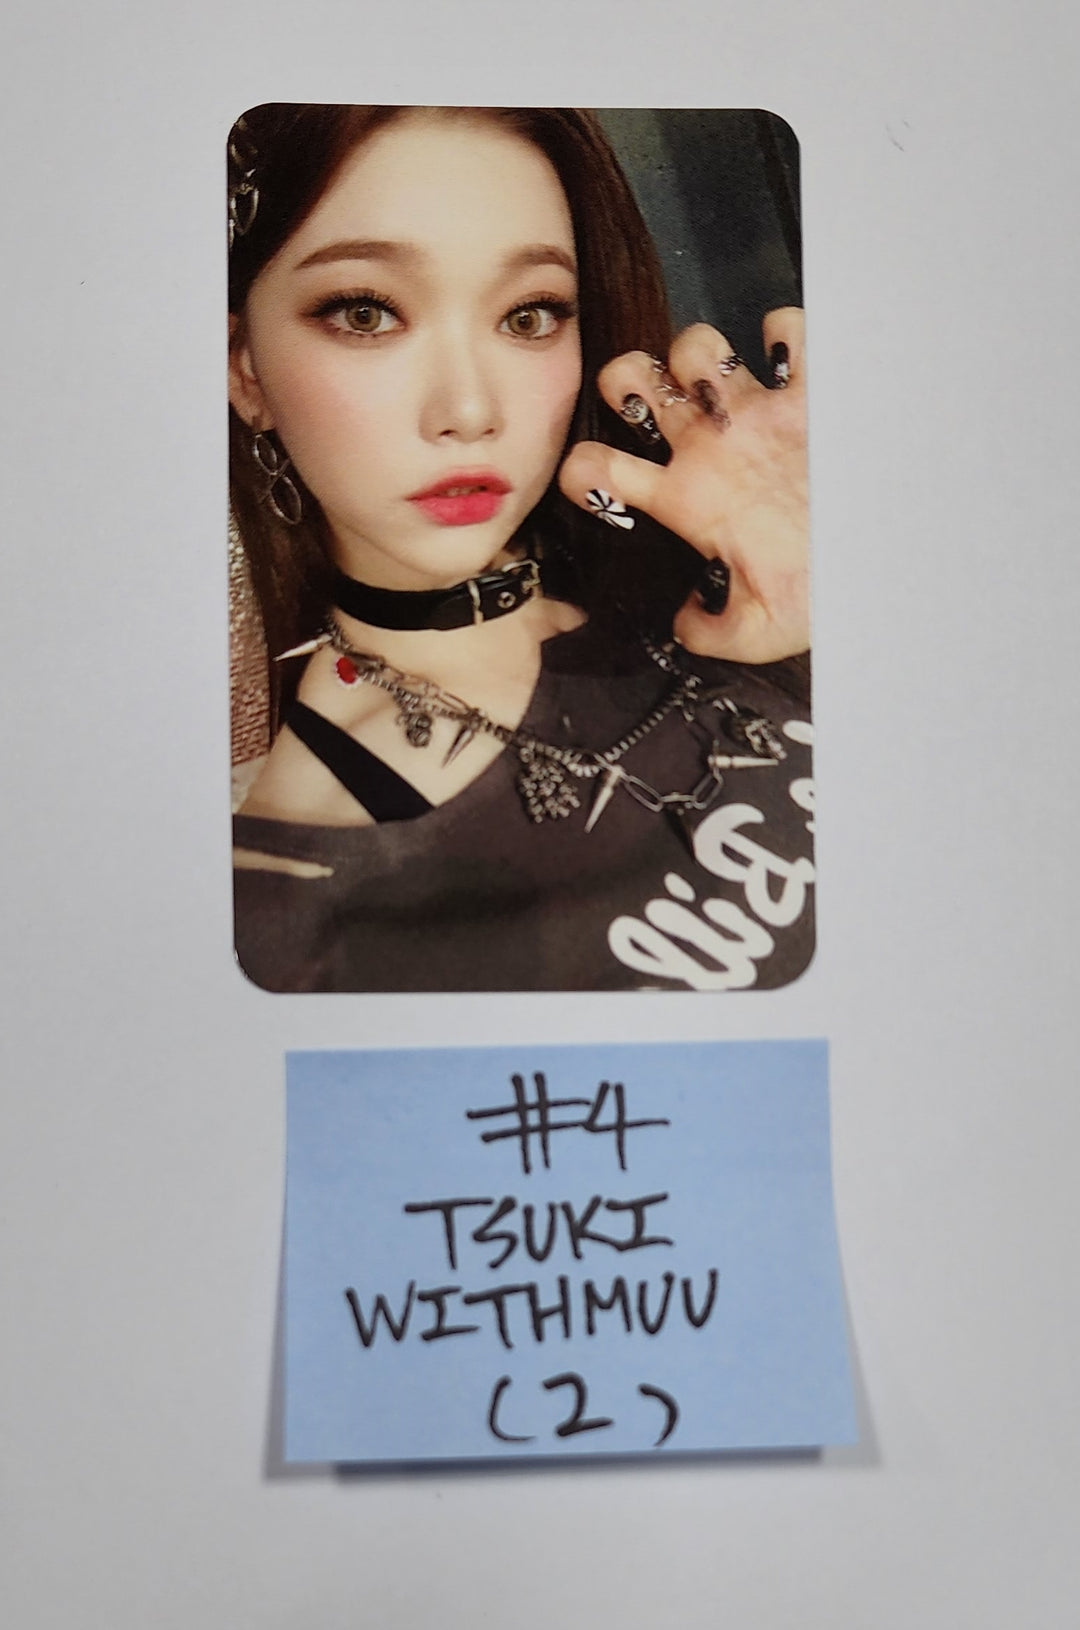 Billlie 'the Billage of perception : chapter two' - Withmuu Pre-Order Benefit Photocard